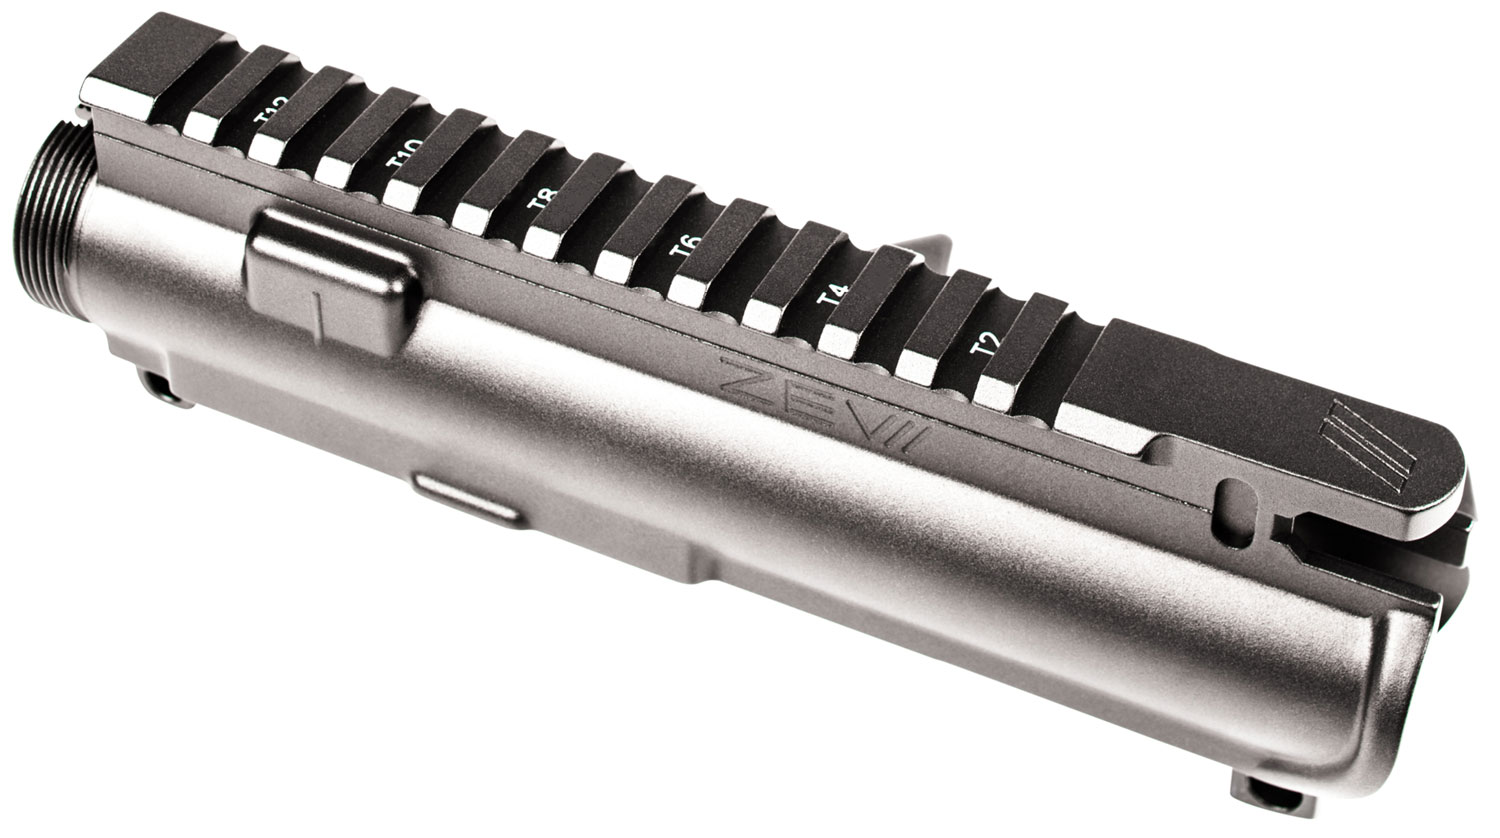 ZEV UR556FOR Forged Upper Receiver  5.56x45mm NATO 7075-T6 Aluminum Black Anodized Receiver for AR-15